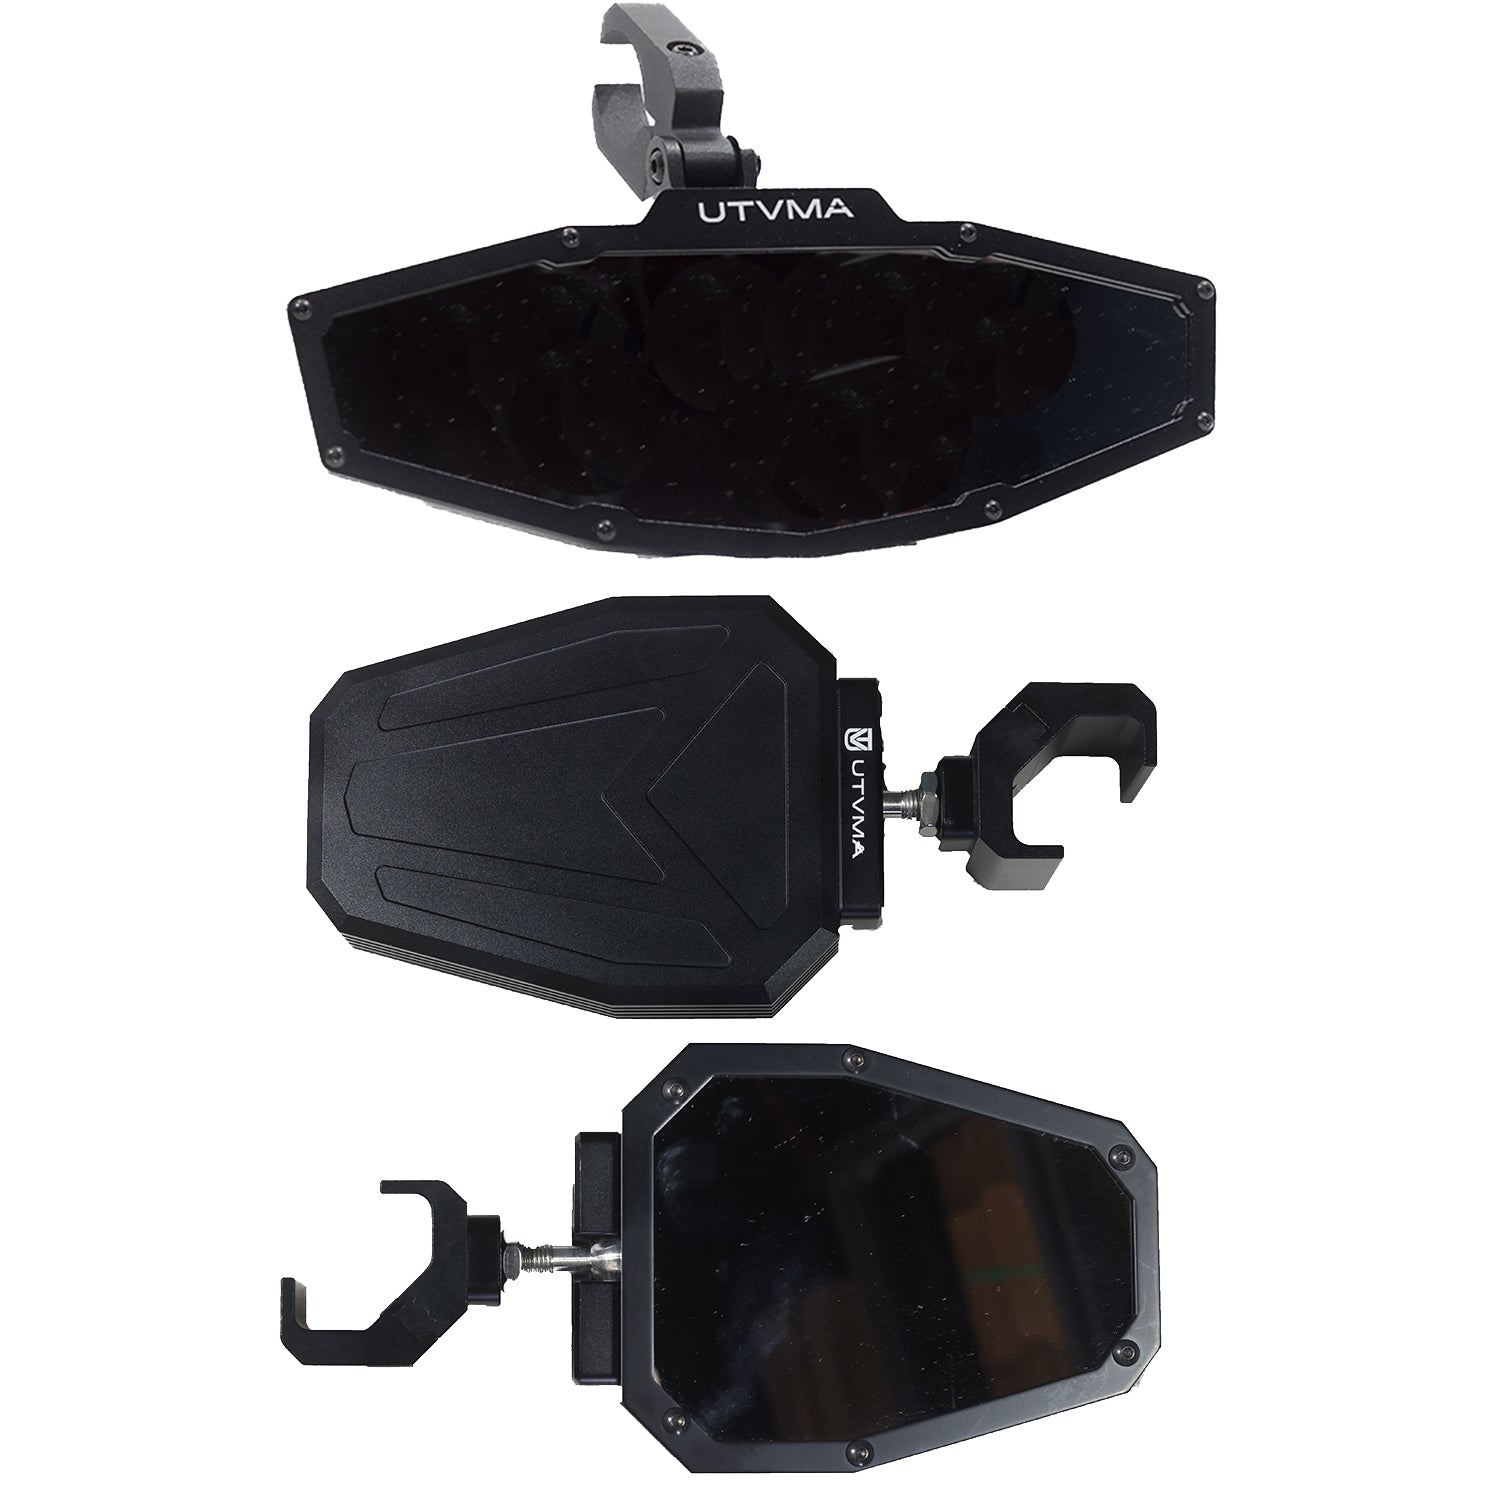 UTVMA Rearview and Sideview Mirror Kit